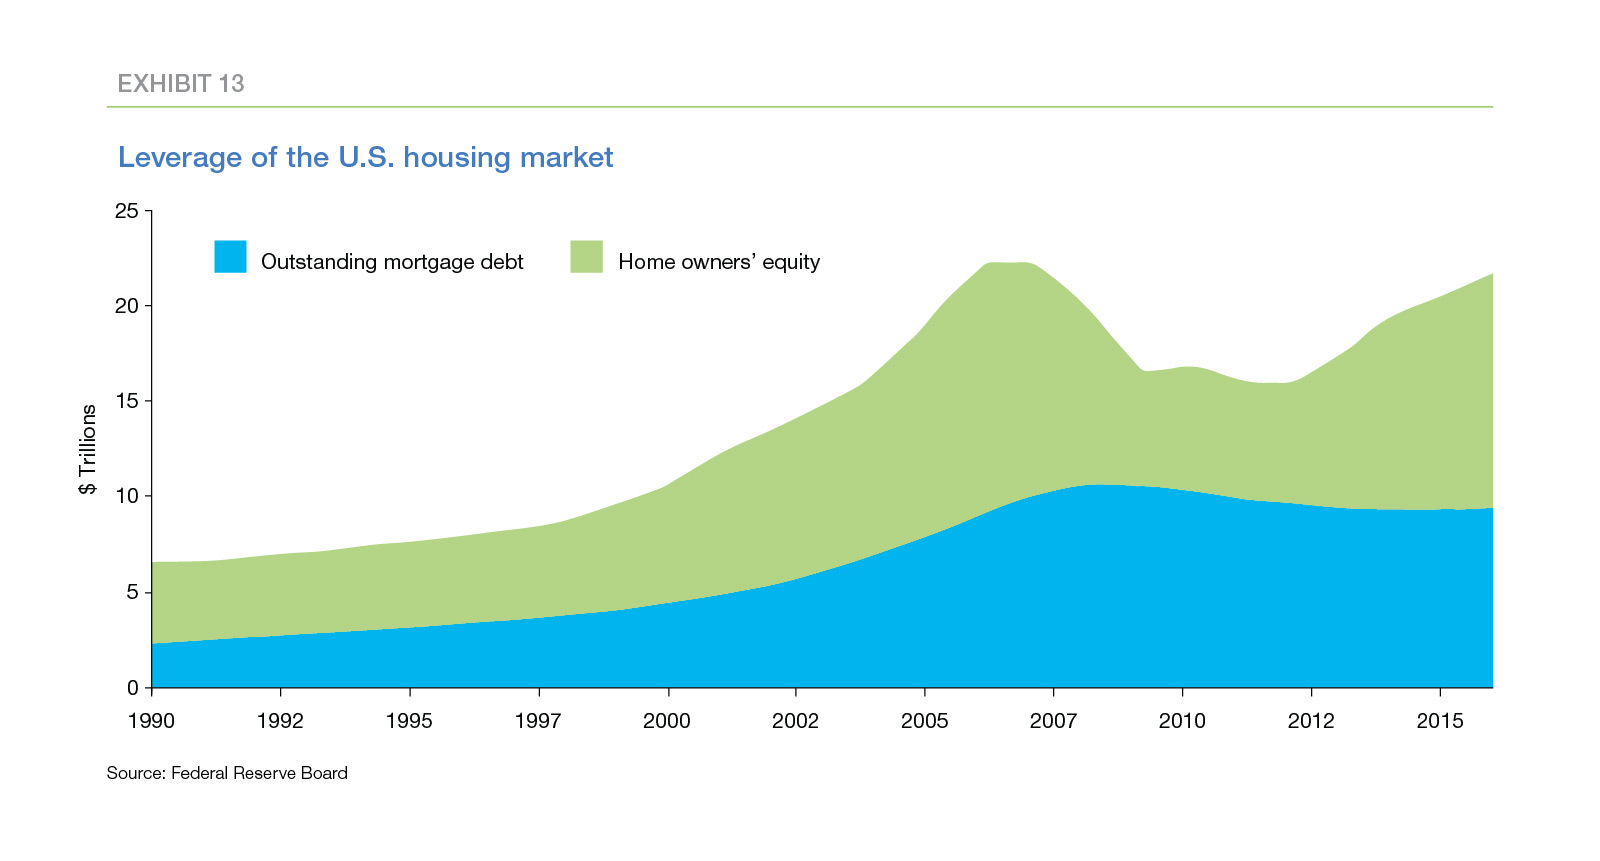 Color graph showing the leverage of the U.S. housing market between Outstanding mortgage debt, and Home owners' equity from 1990 to 2015